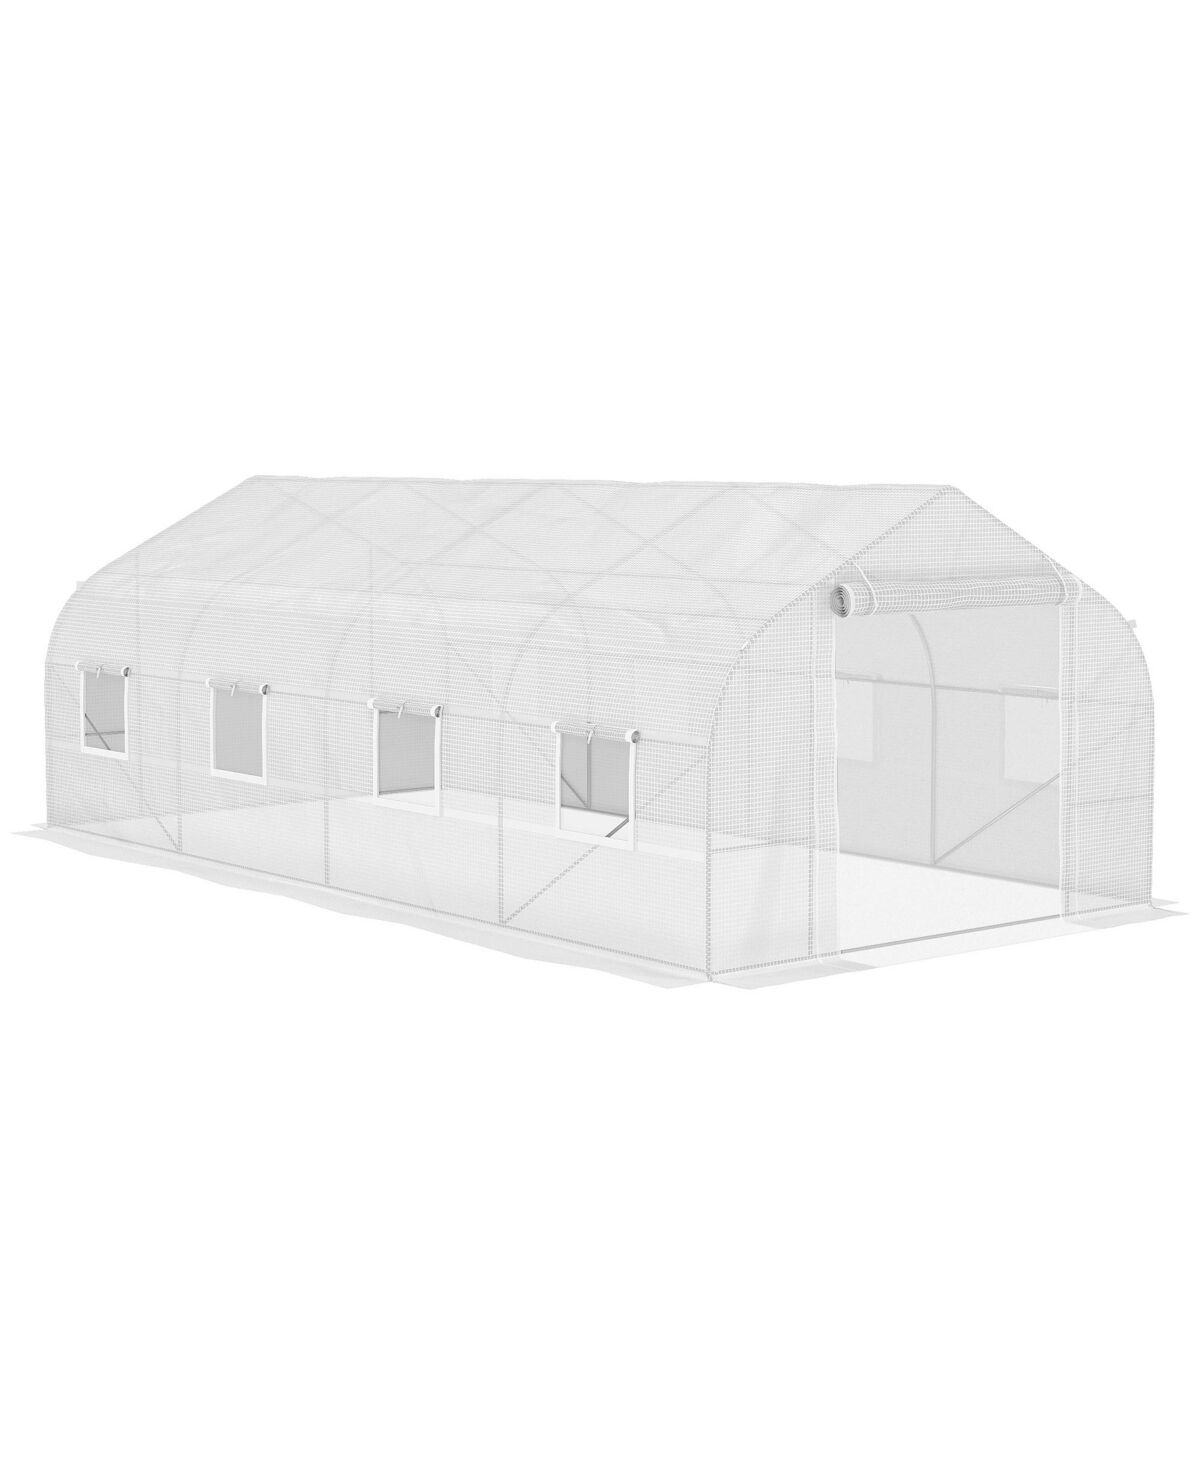 Outsunny 20' x 10' x 7' Walk-In Greenhouse, Outdoor Gardening Canopy Hot House with 8 Roll-up Windows, Zippered Door & Weather Cover, Steel Frame, Whi